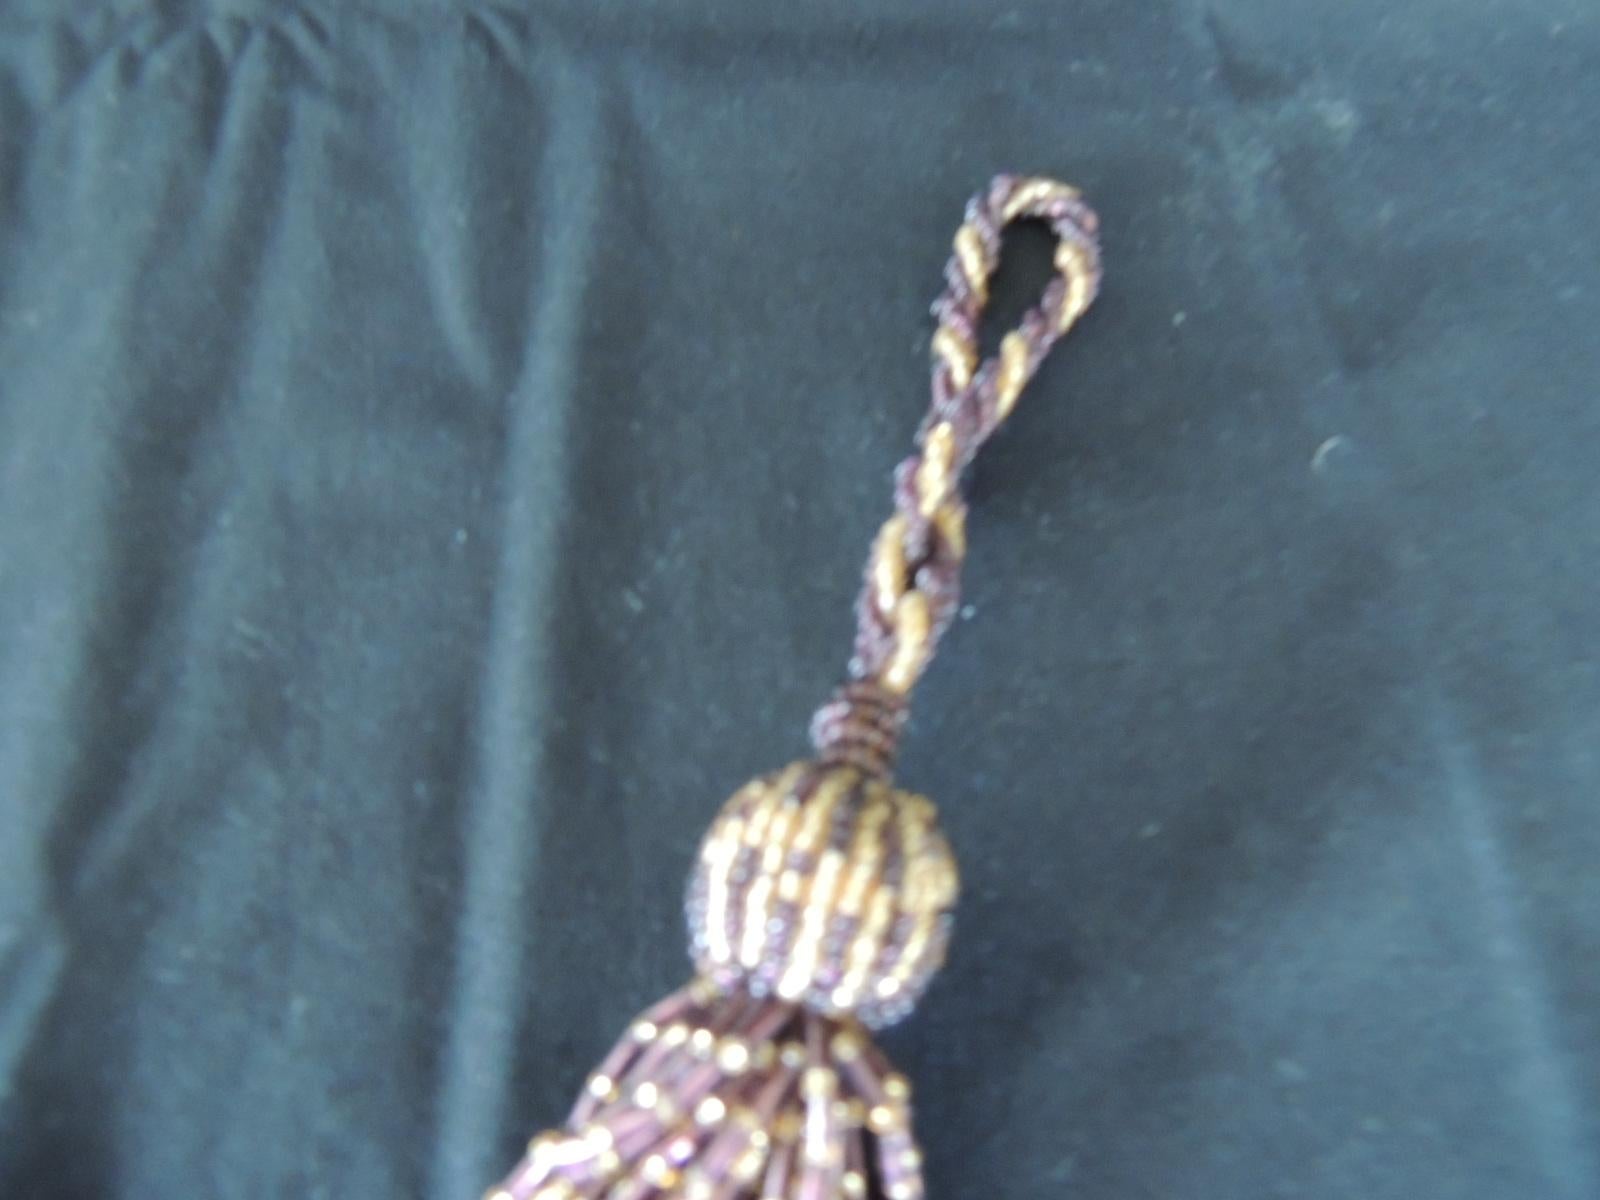 French glass beads decorative tassel.
Hand woven key tassel with glass and acrylic beads.
In shades of brown, burgundy and gold.
Size: 7